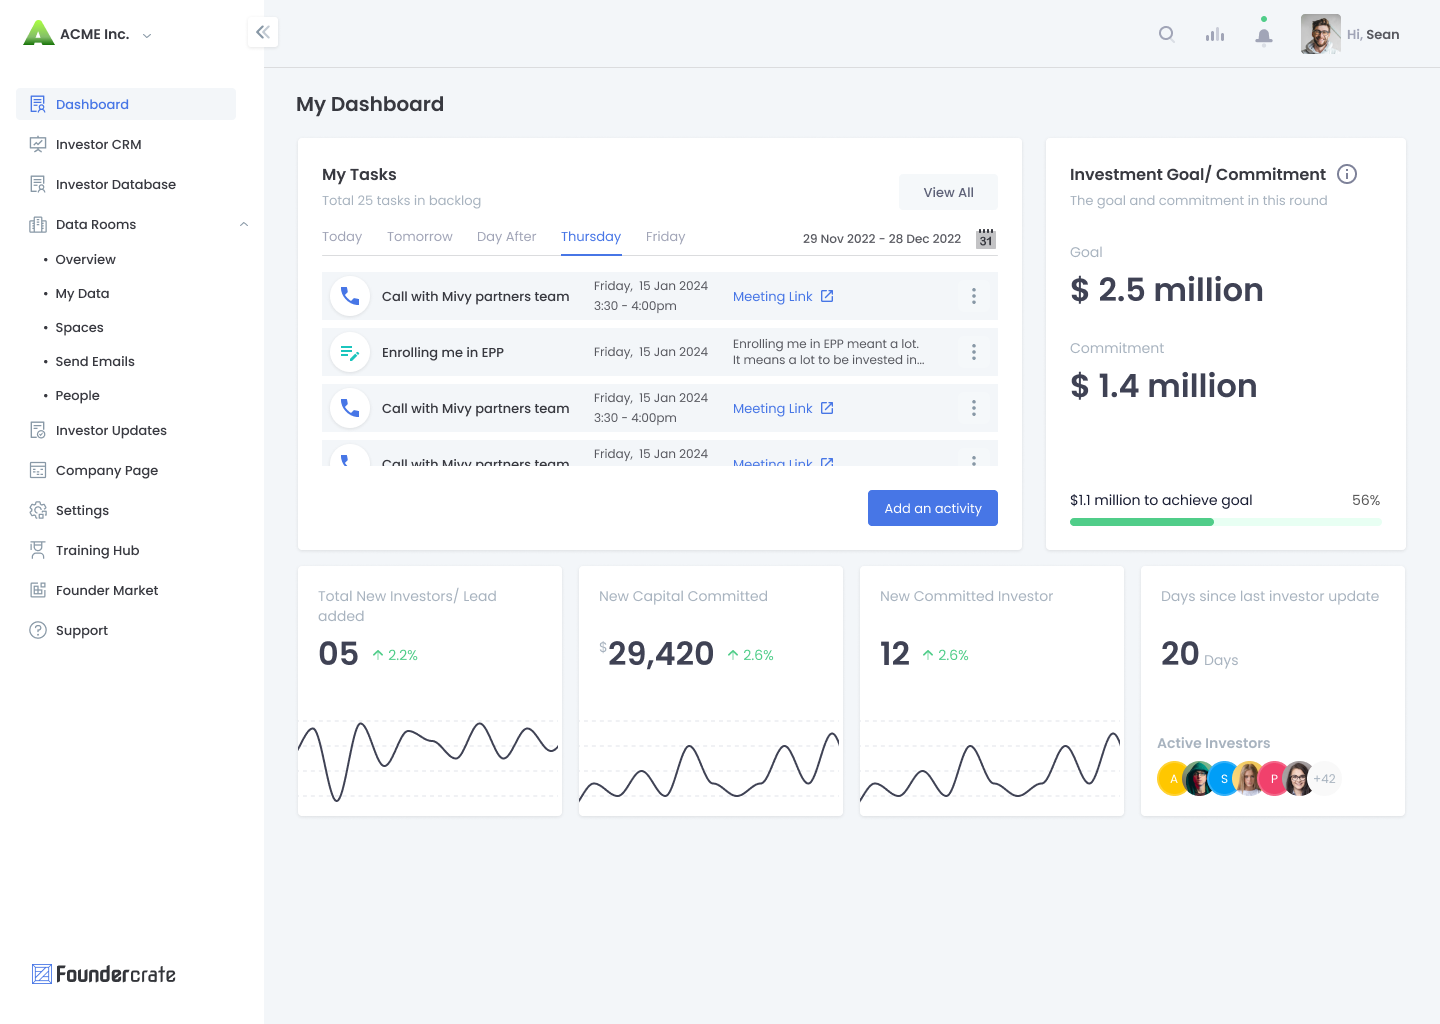 Track your fundraising progress and daily tasks with investors on the dashboard. Stay on top of meetings, updates, and other important tasks. Plus, easily monitor essential KPIs for fundraising all in one place.